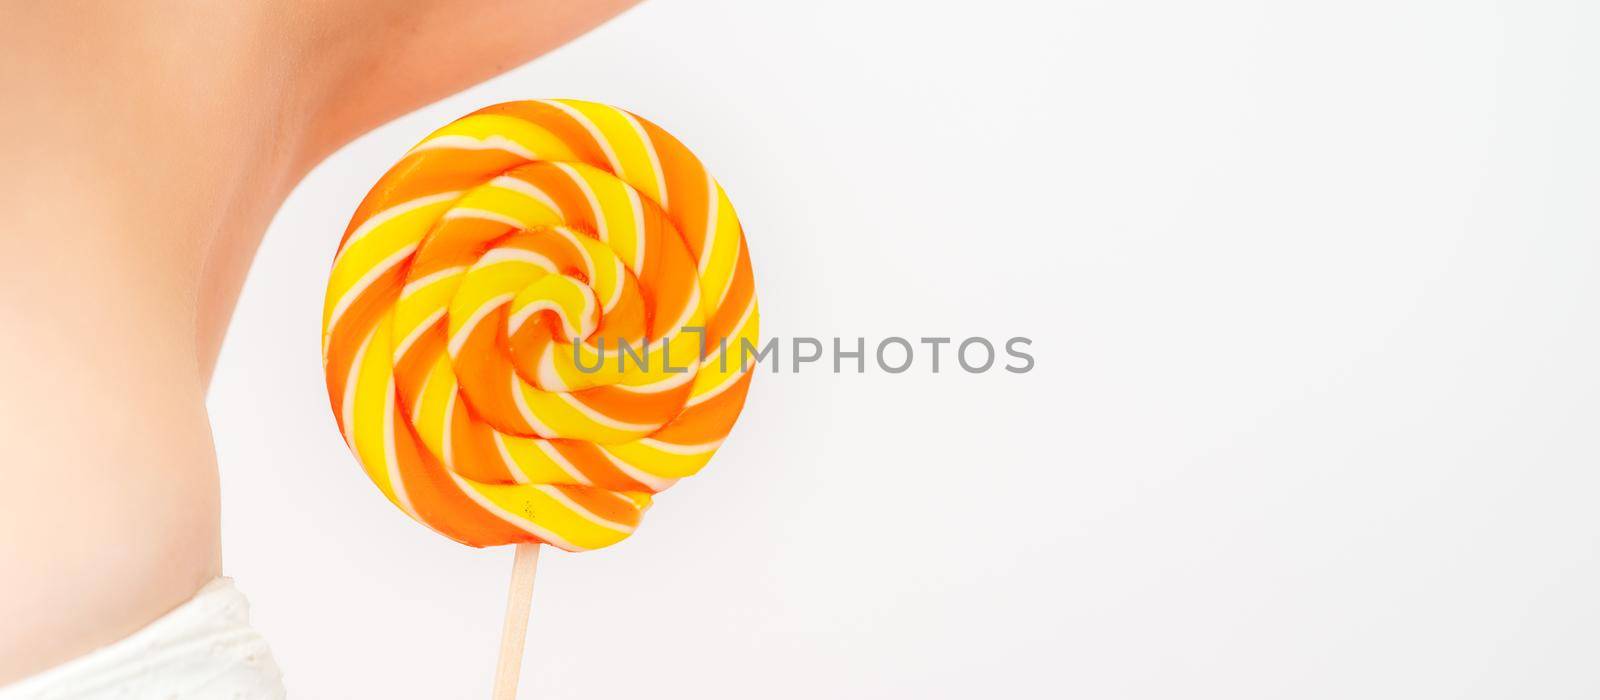 Waxing, depilation concept. A young female holds a round lollipop near her armpit on white background